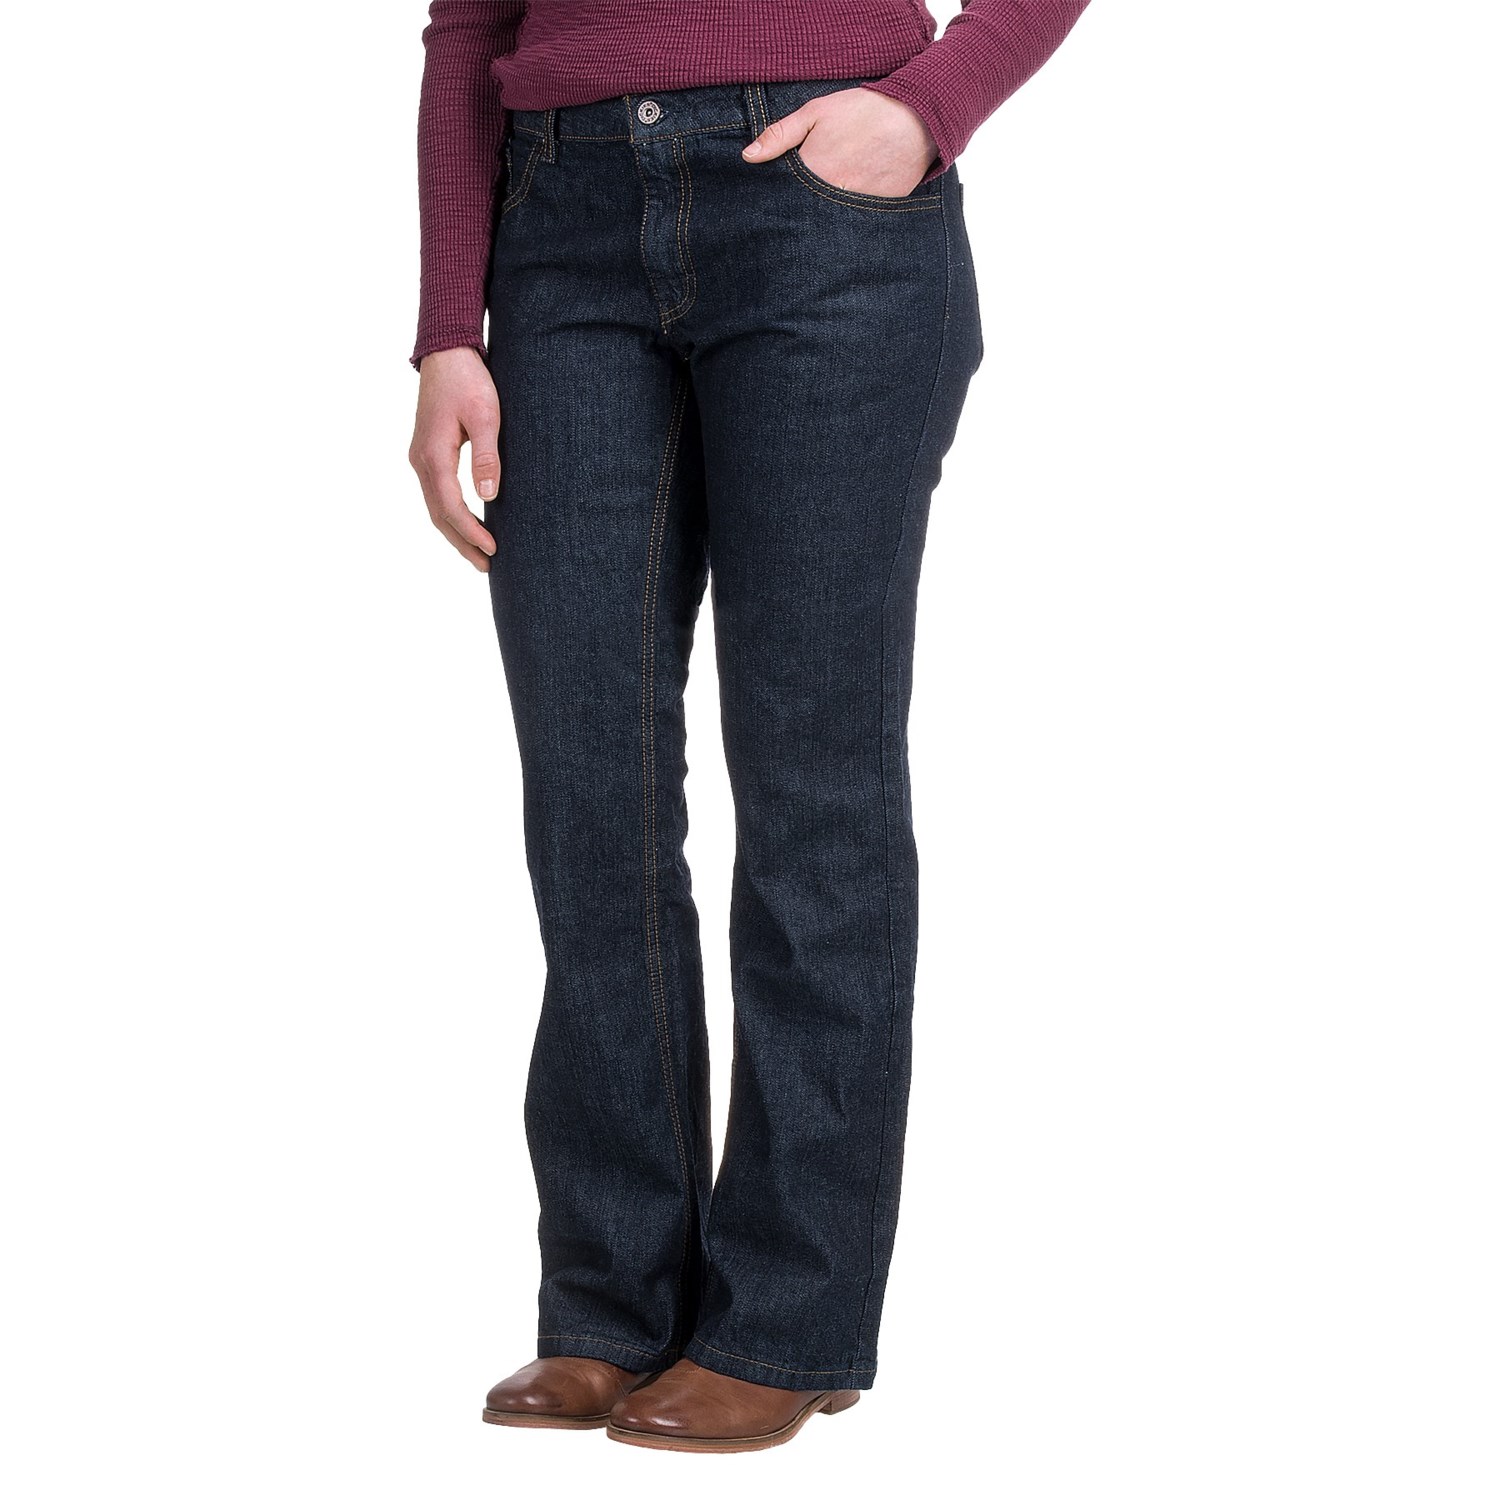 Dickies Relaxed-Fit Jeans (For Women) - Save 70%